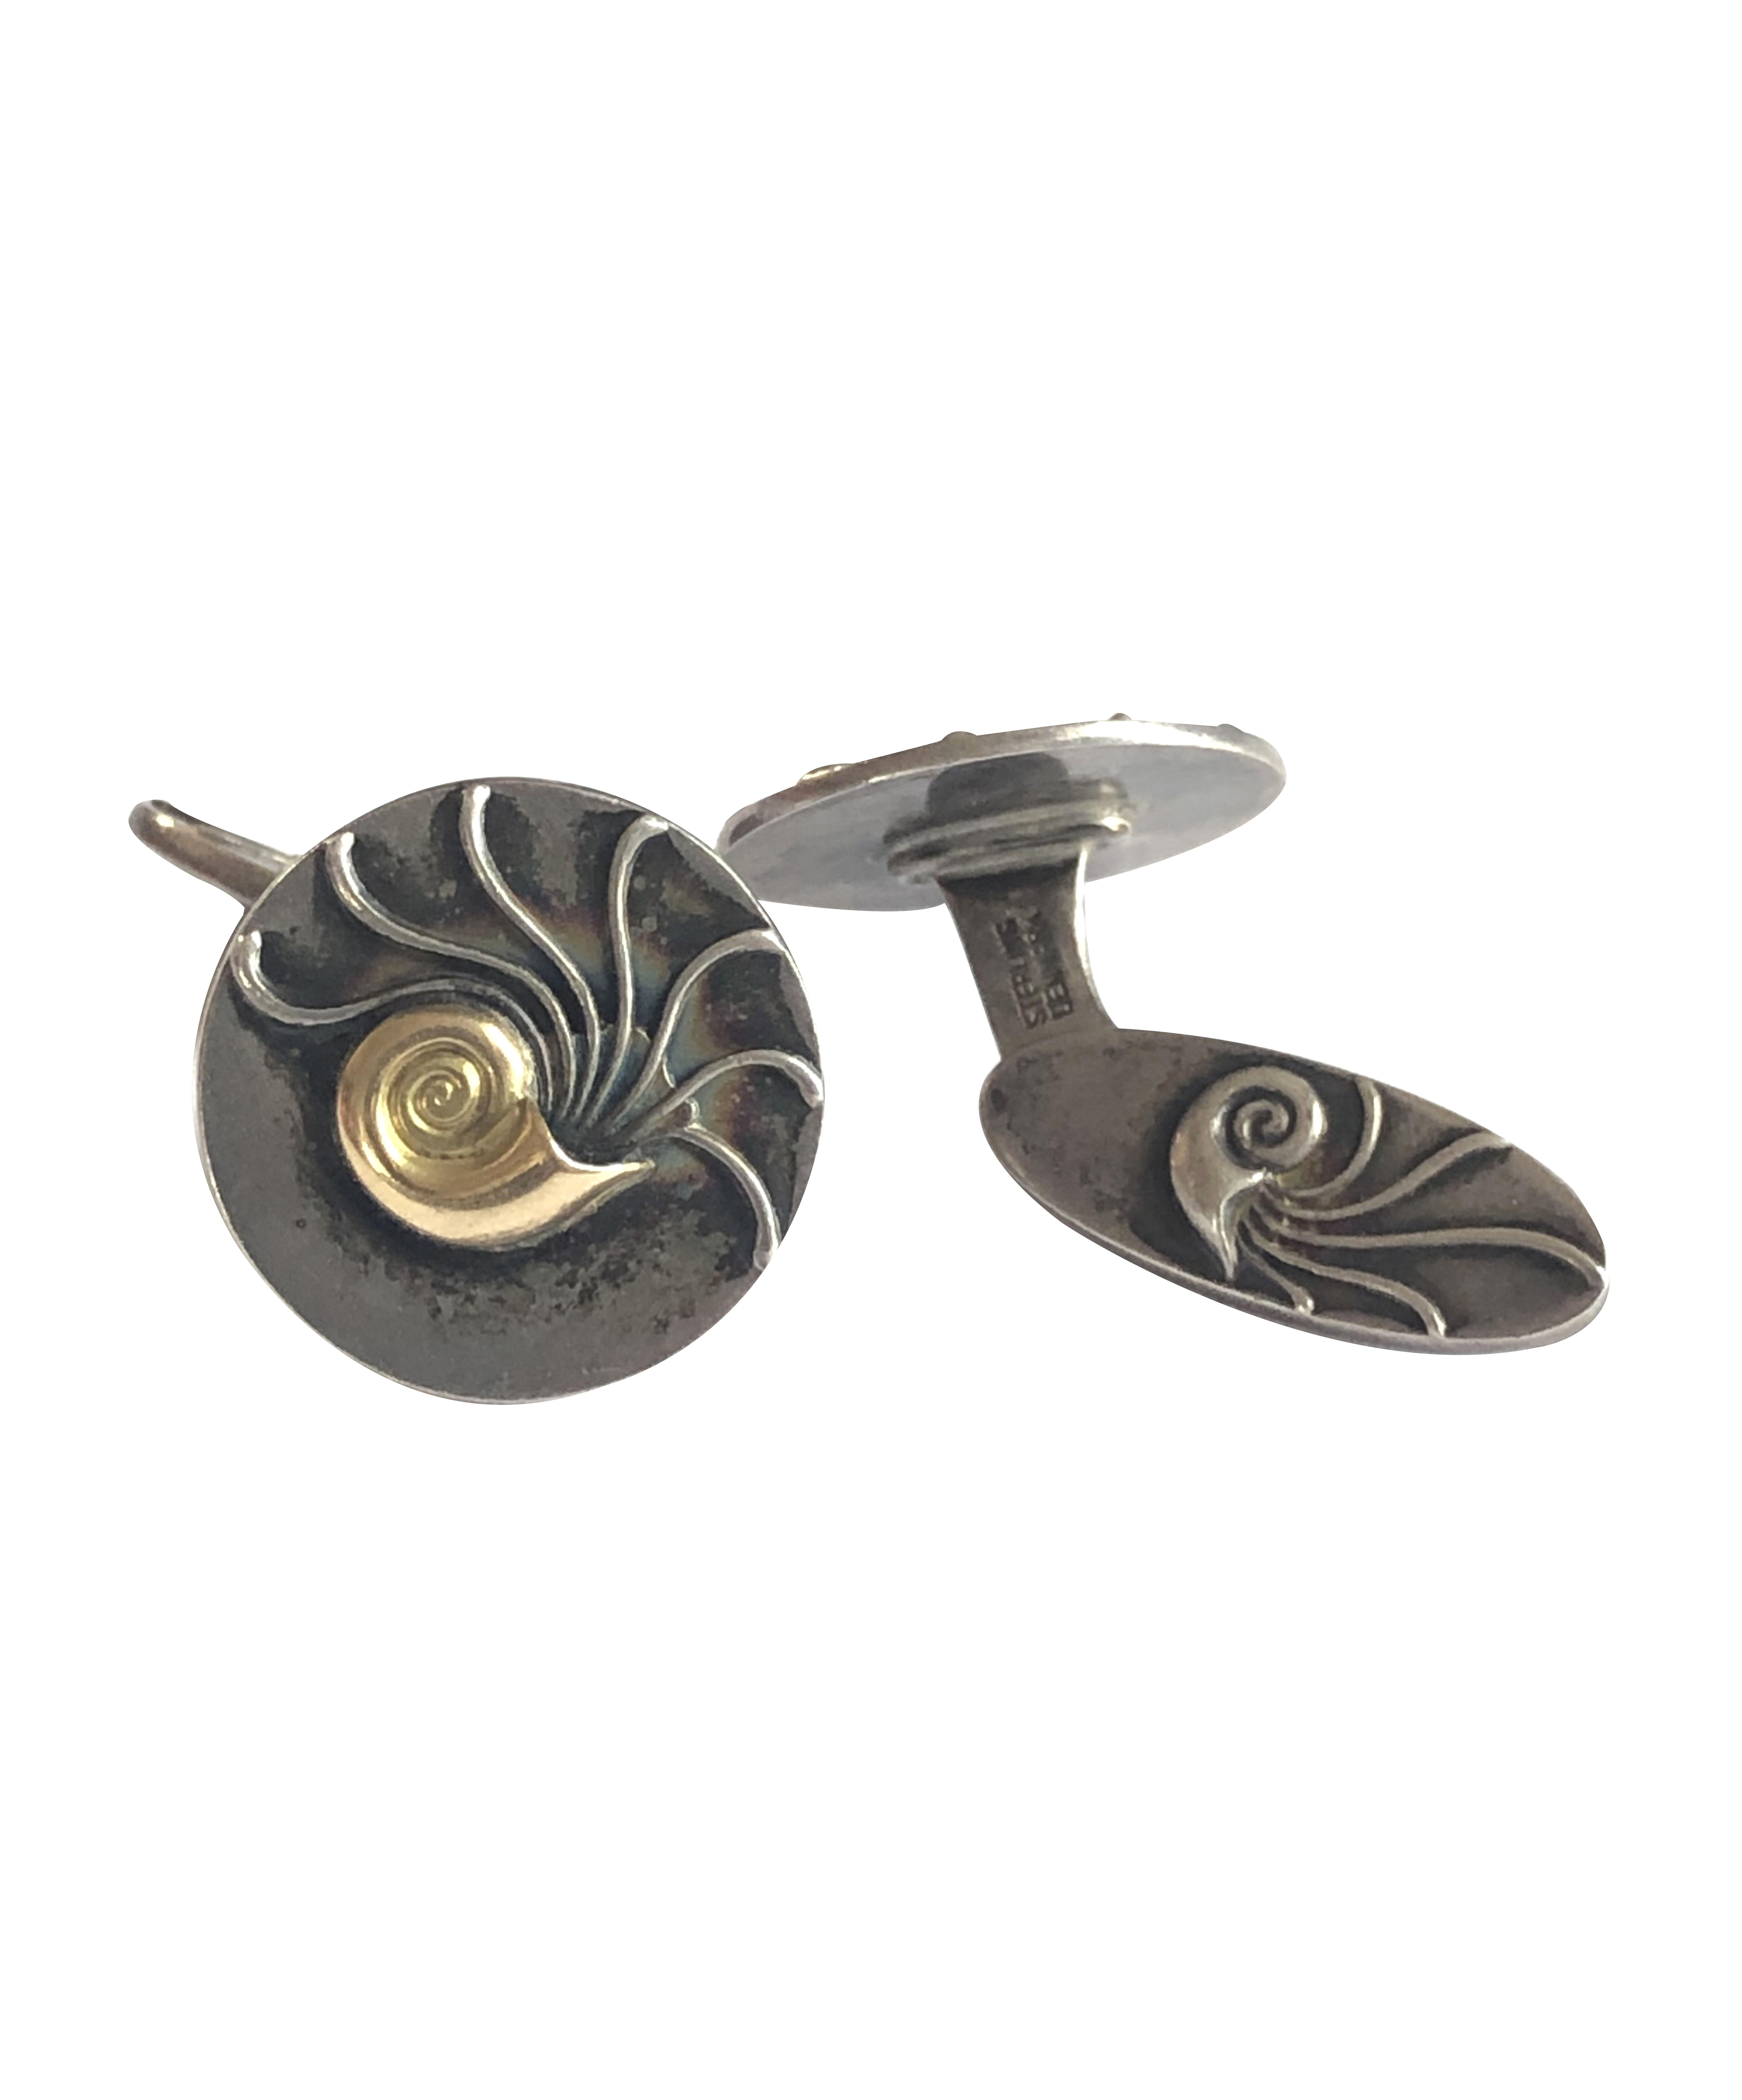 Circa 1930 - 1940 Georg Jensen #52 Nautilus Shell Cufflinks, Sterling Silver with an Applied Gold Nautilus Shell, the tops measure 3/4 inch in diameter. Lever back for easy on and off. 